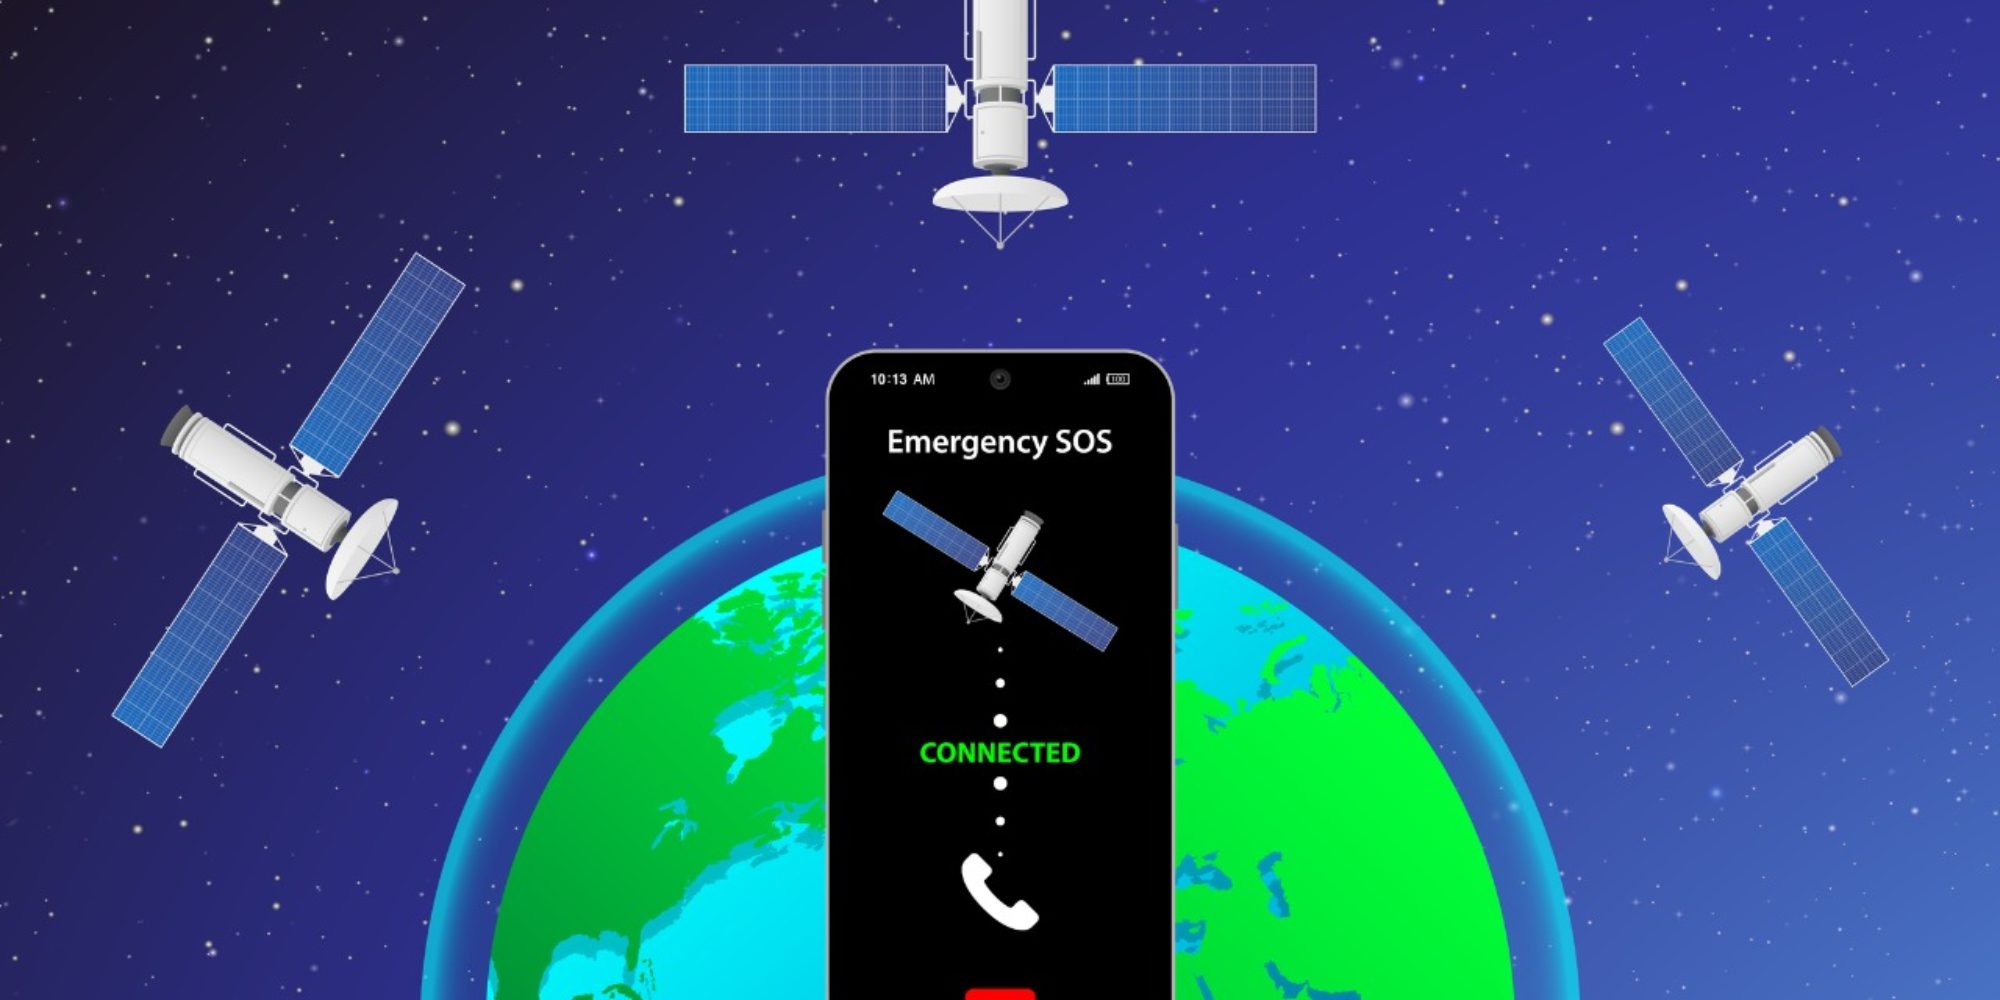 Practice with the Emergency SOS via Satellite Demo, Just in Case